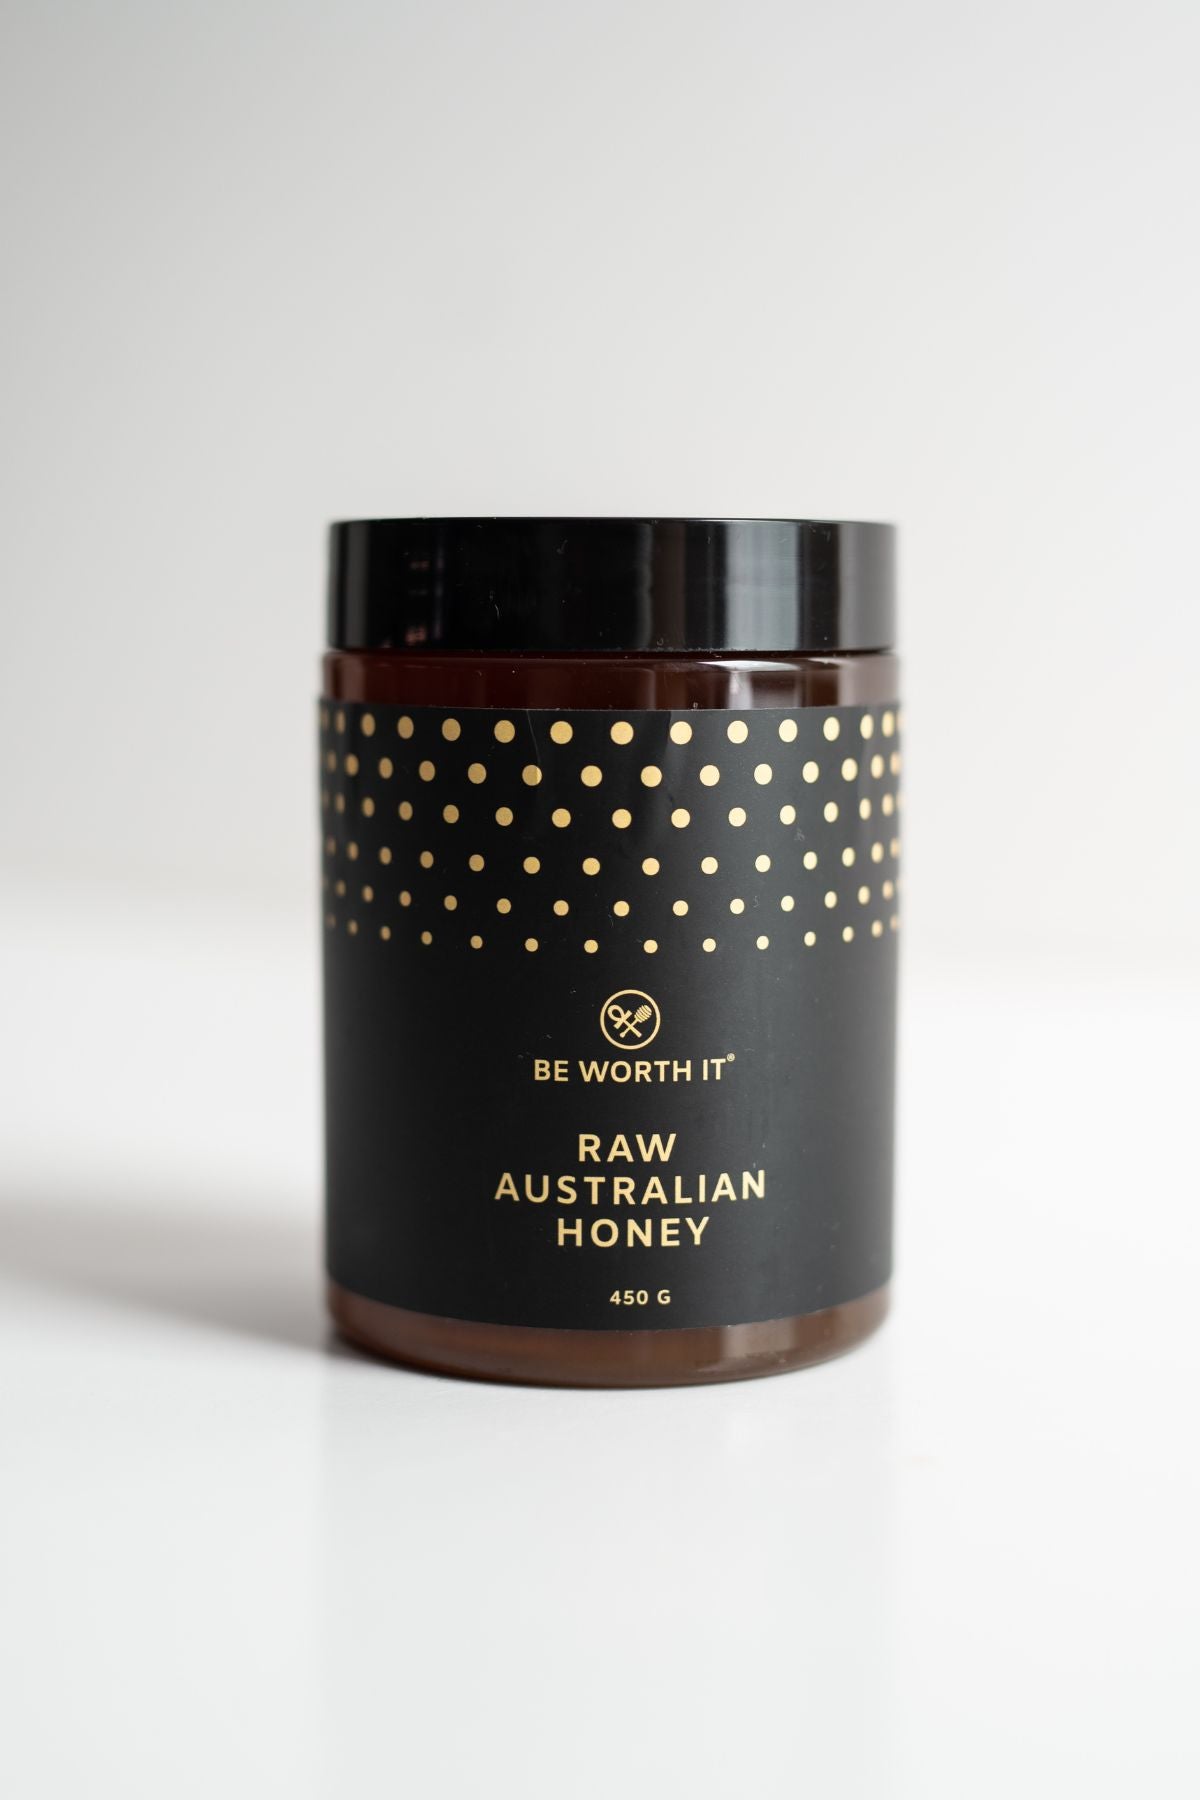 Raw Australian Honey from Be worth it in an elegant 450g jar with a well designed label. This honey is RAW and pure from pristine Forrests in Western Australia